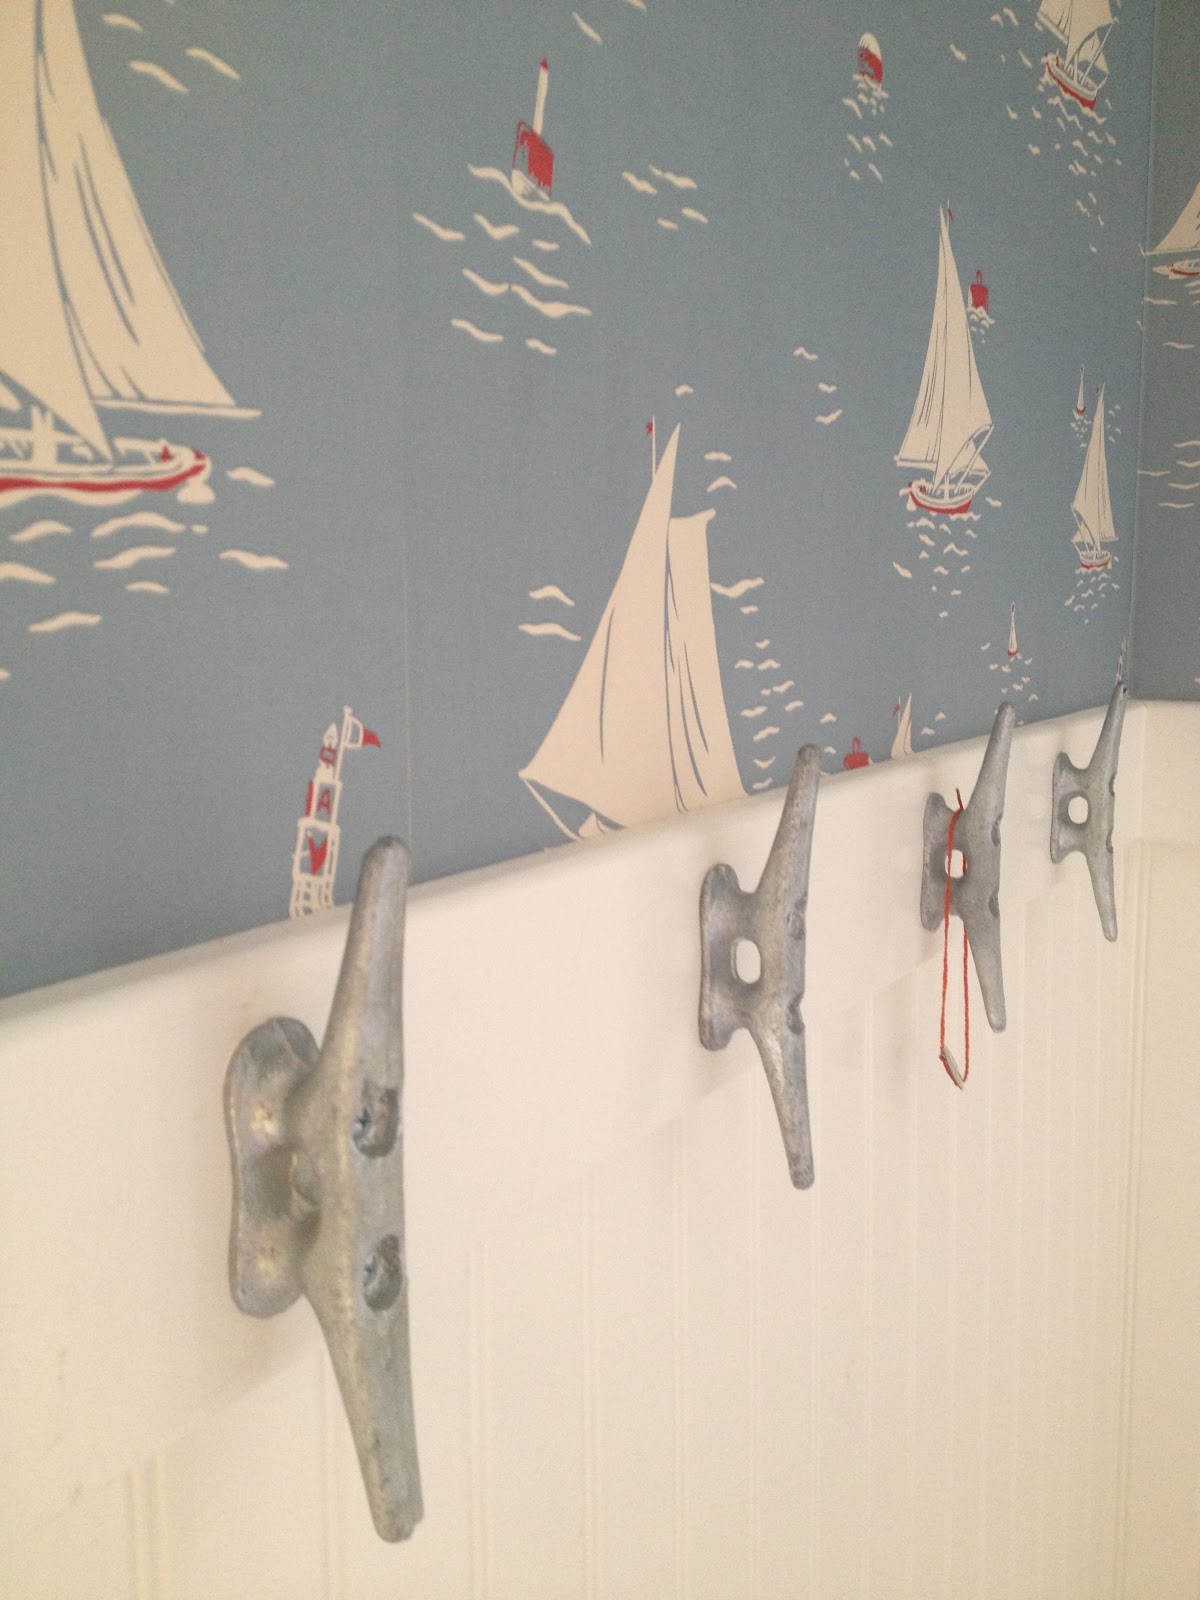 This Old Coconut Grove: cabana bathroom wallpaper & boat cleats